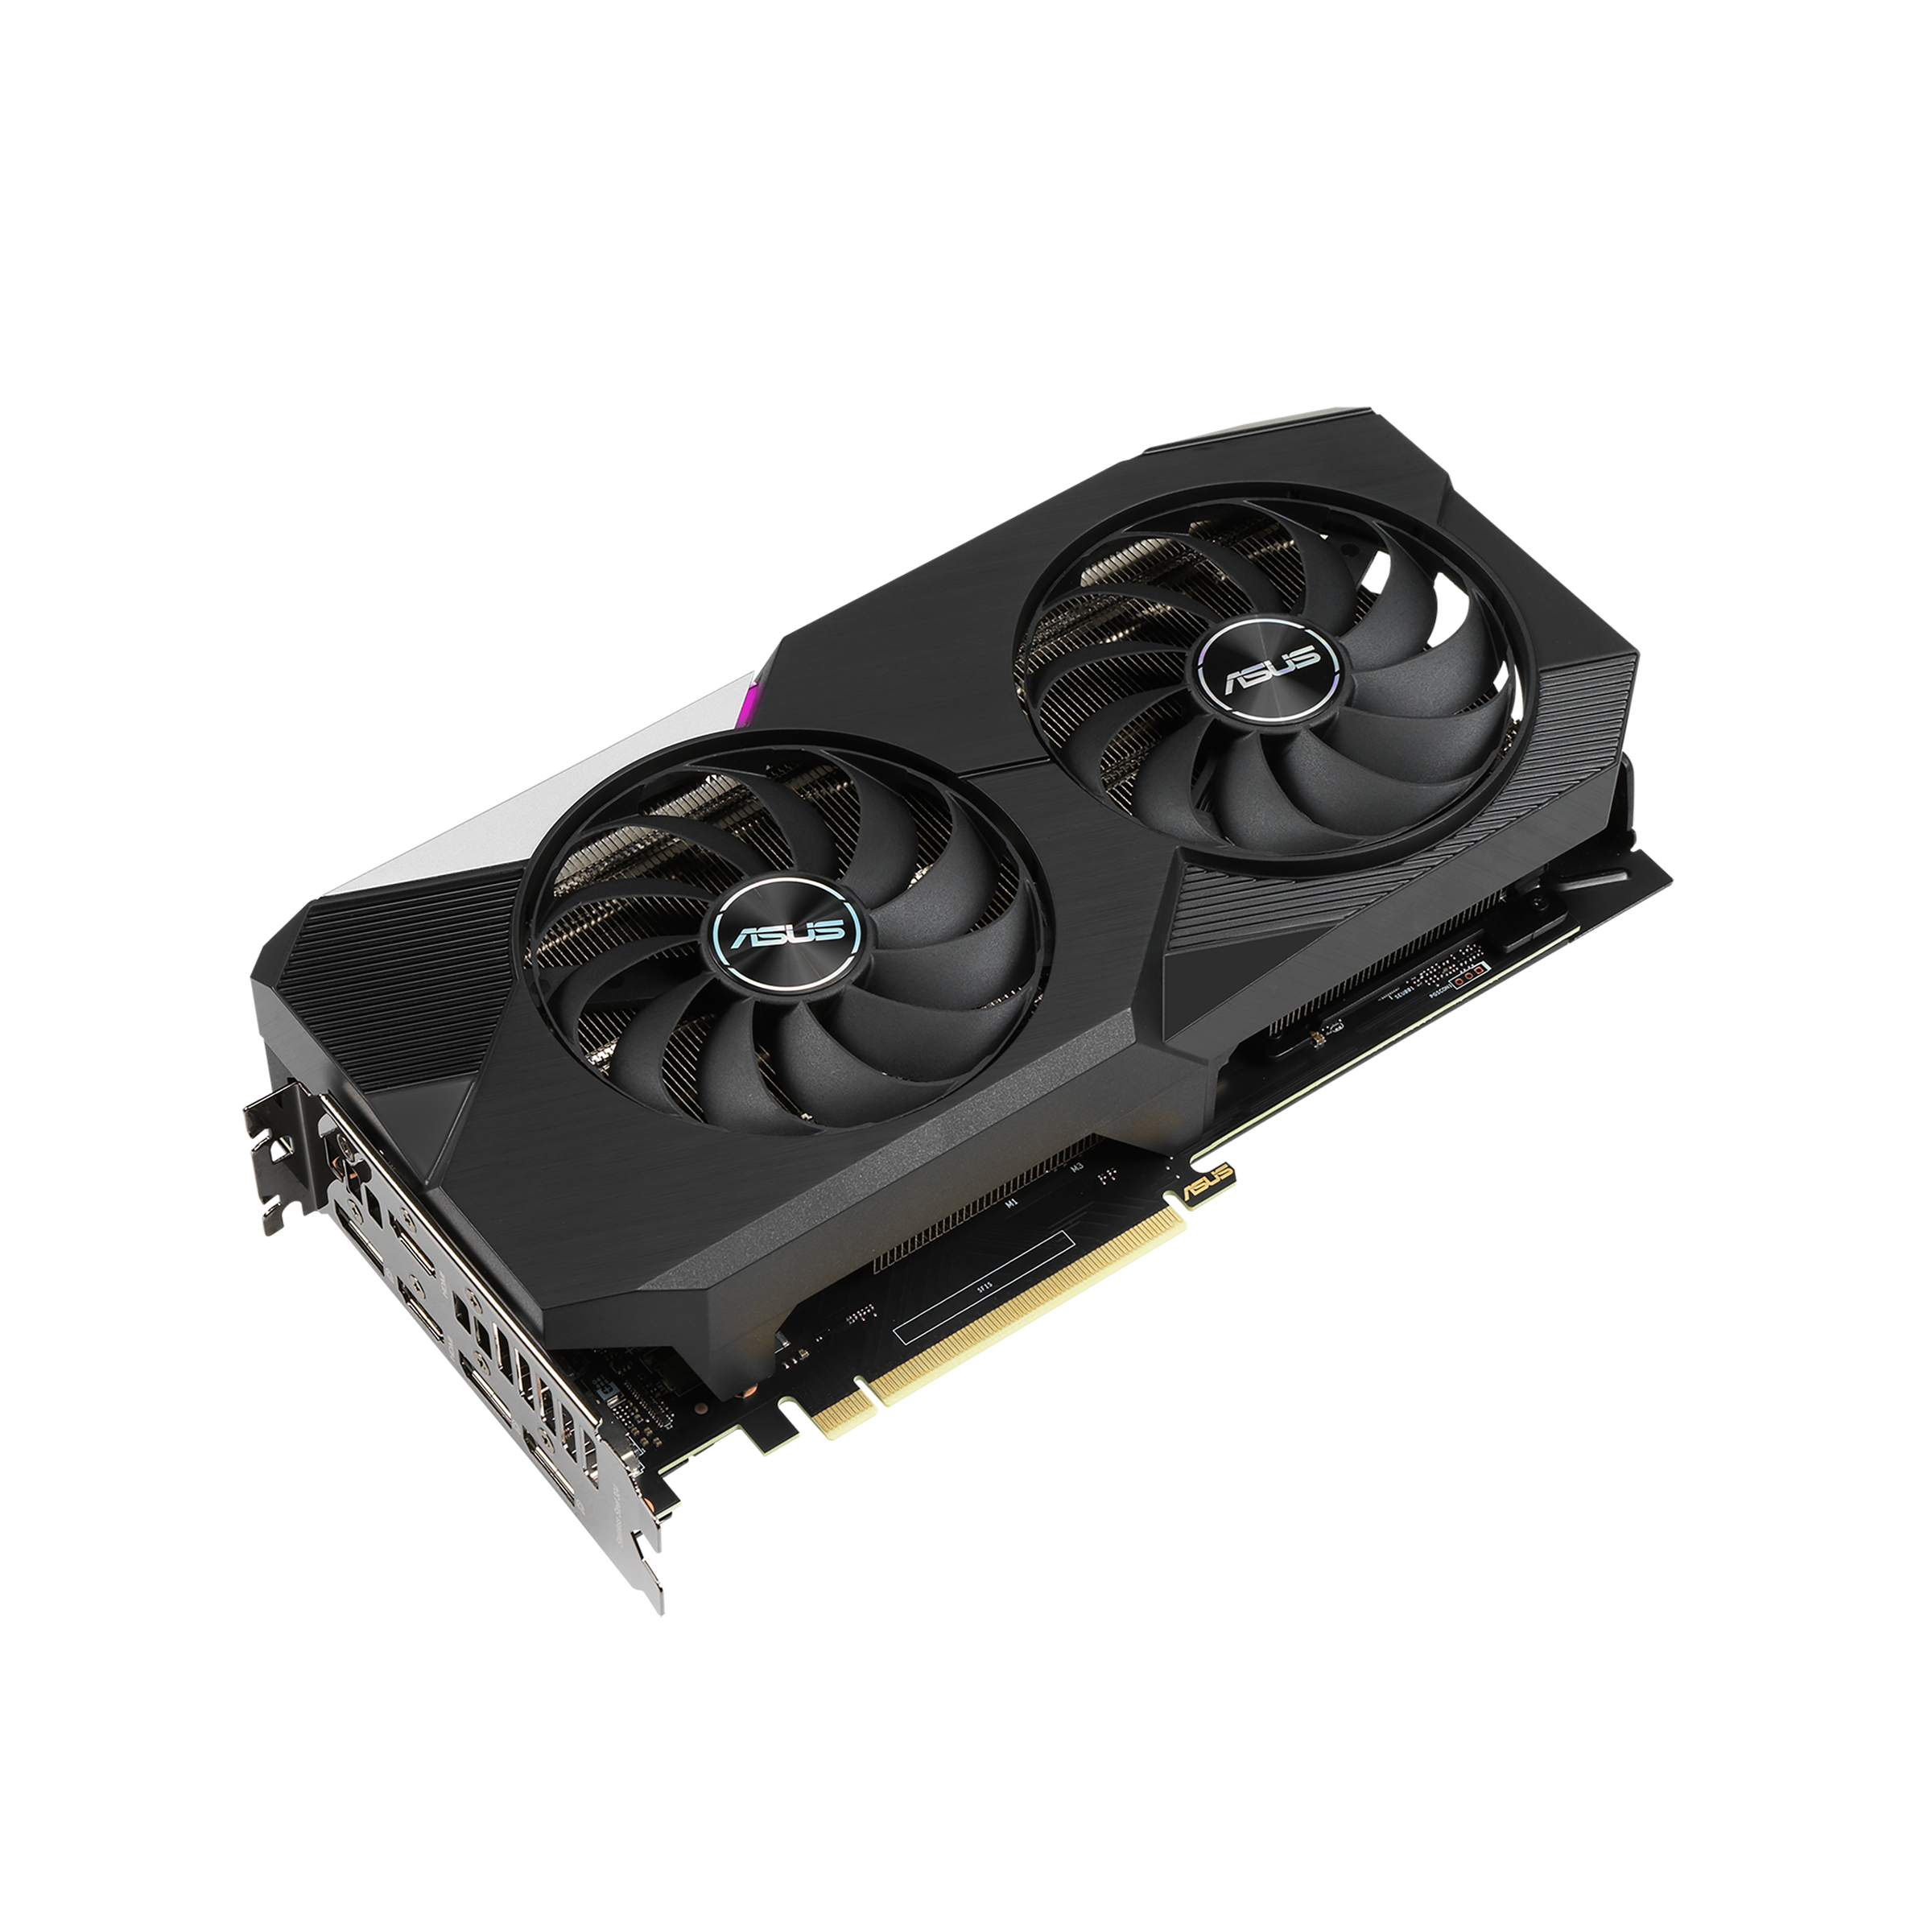 ASUS Dual GeForce RTX2060 グラフィクスボード